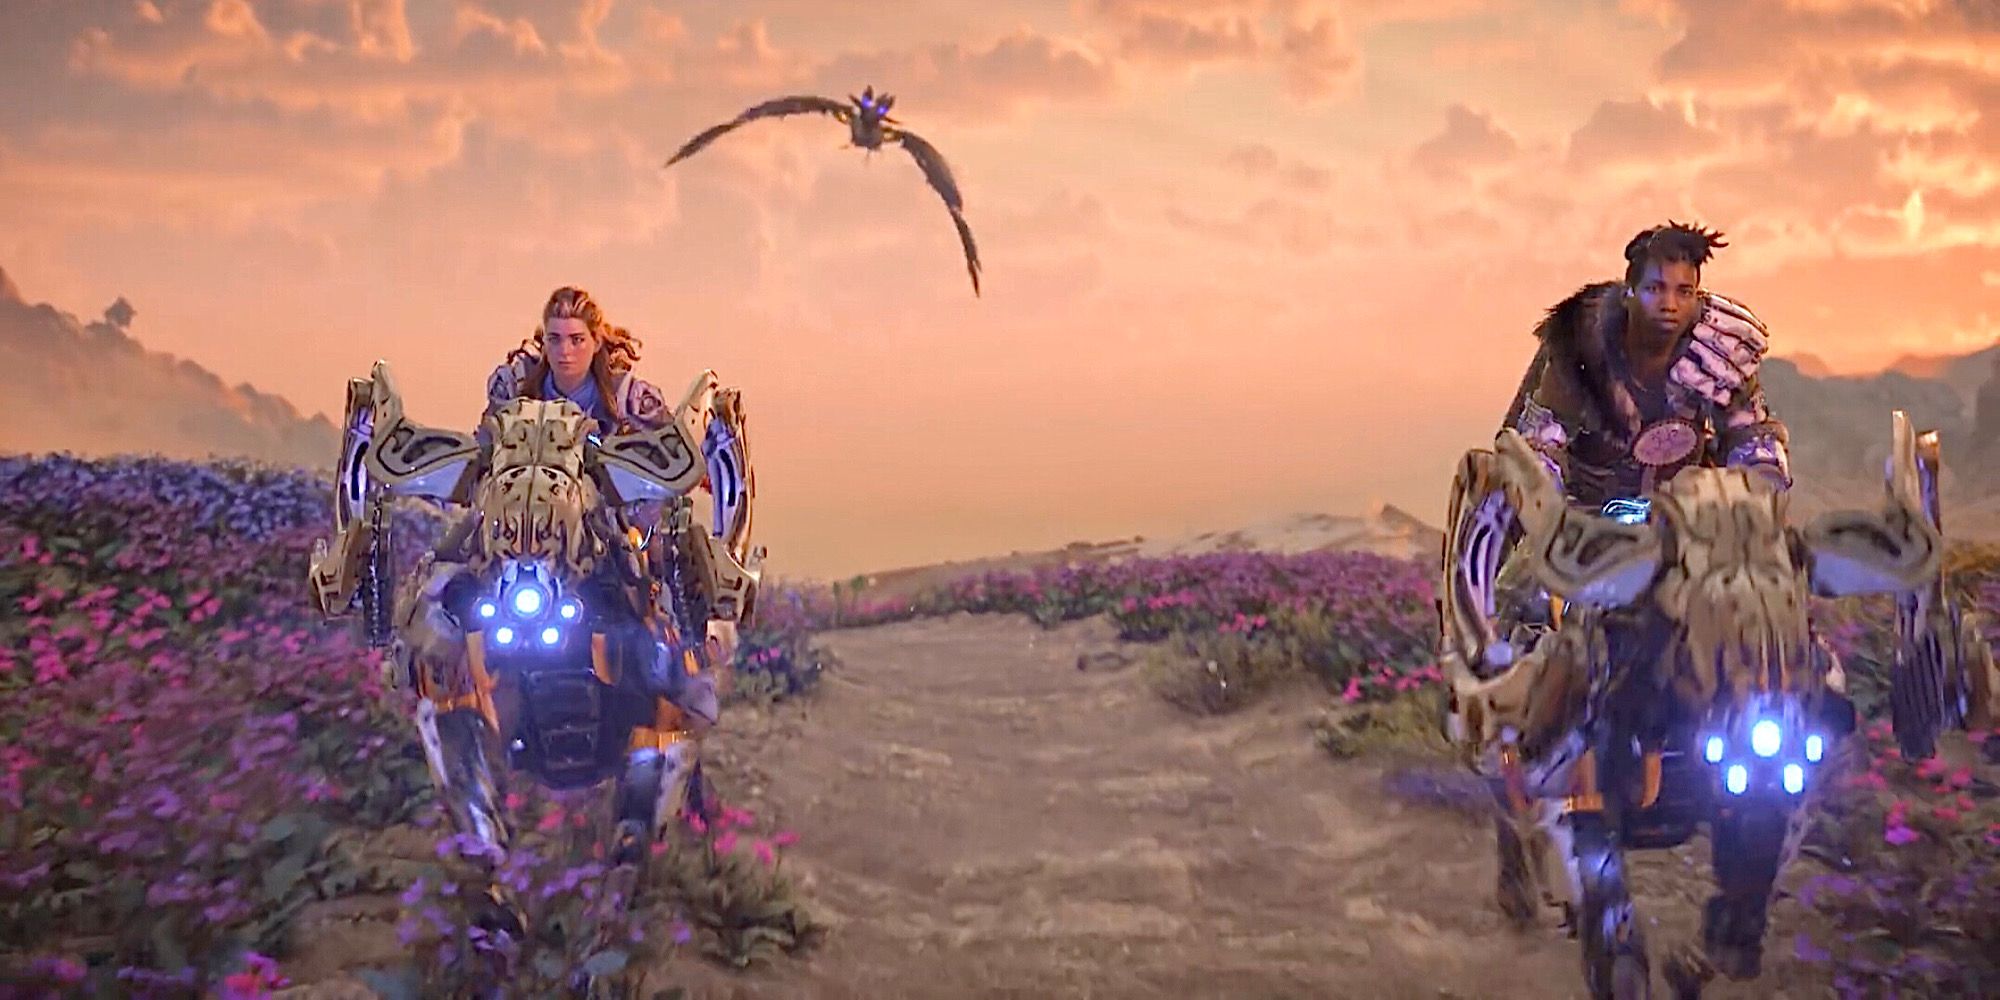 Horizon Forbidden West: How Aloy’s Character Changed From Zero Dawn